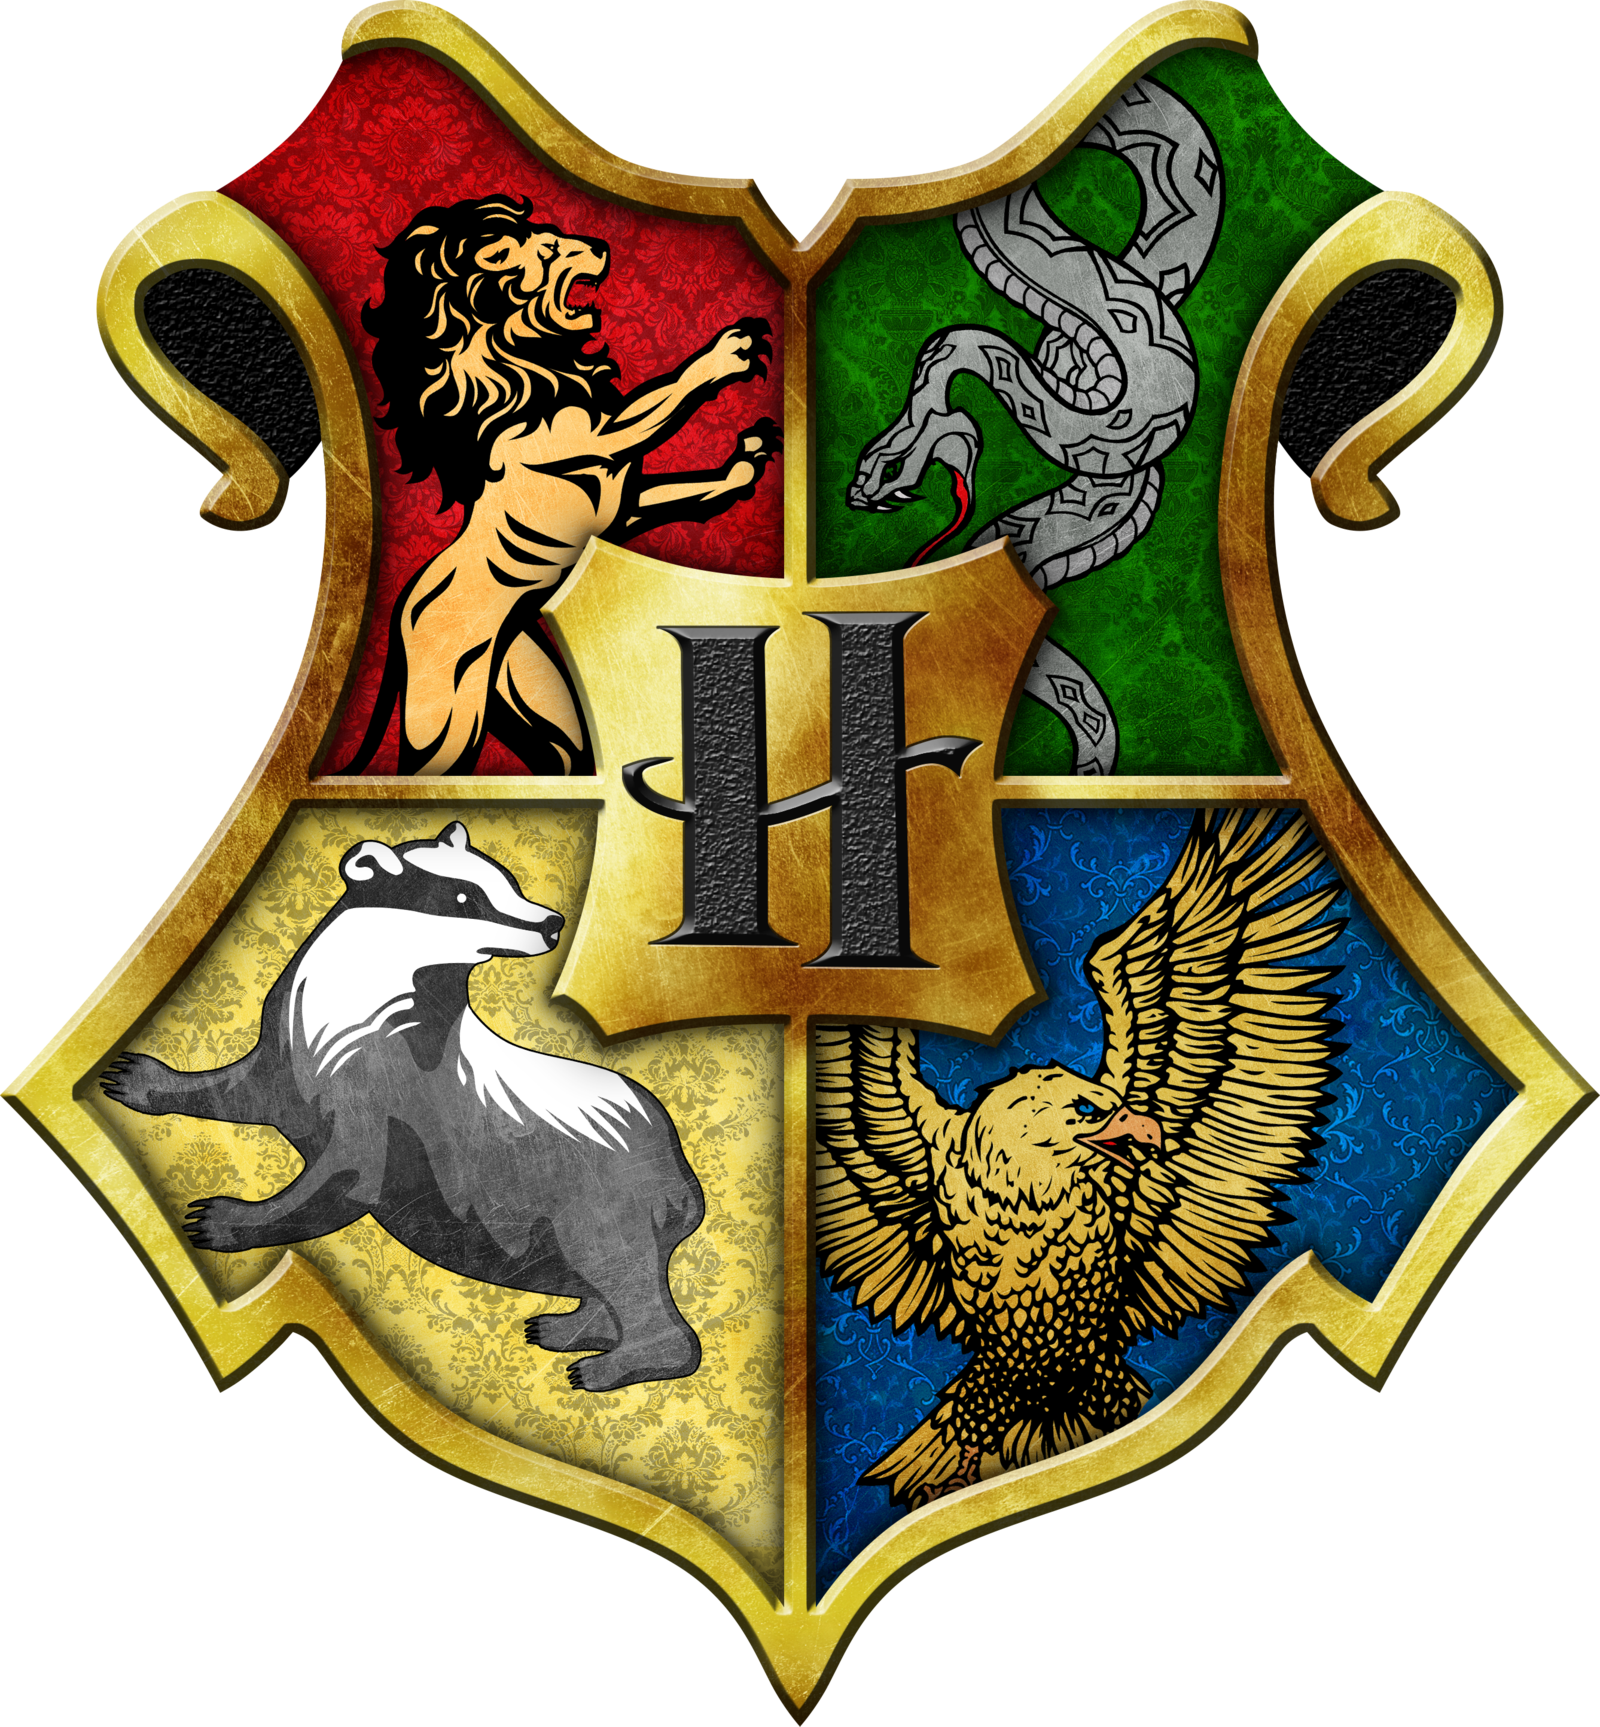 Welcome To Hogwarts School Of Witchcraft And Wizardry - Hogwarts School Of Witchcraft And Wizardry (1600x1727)